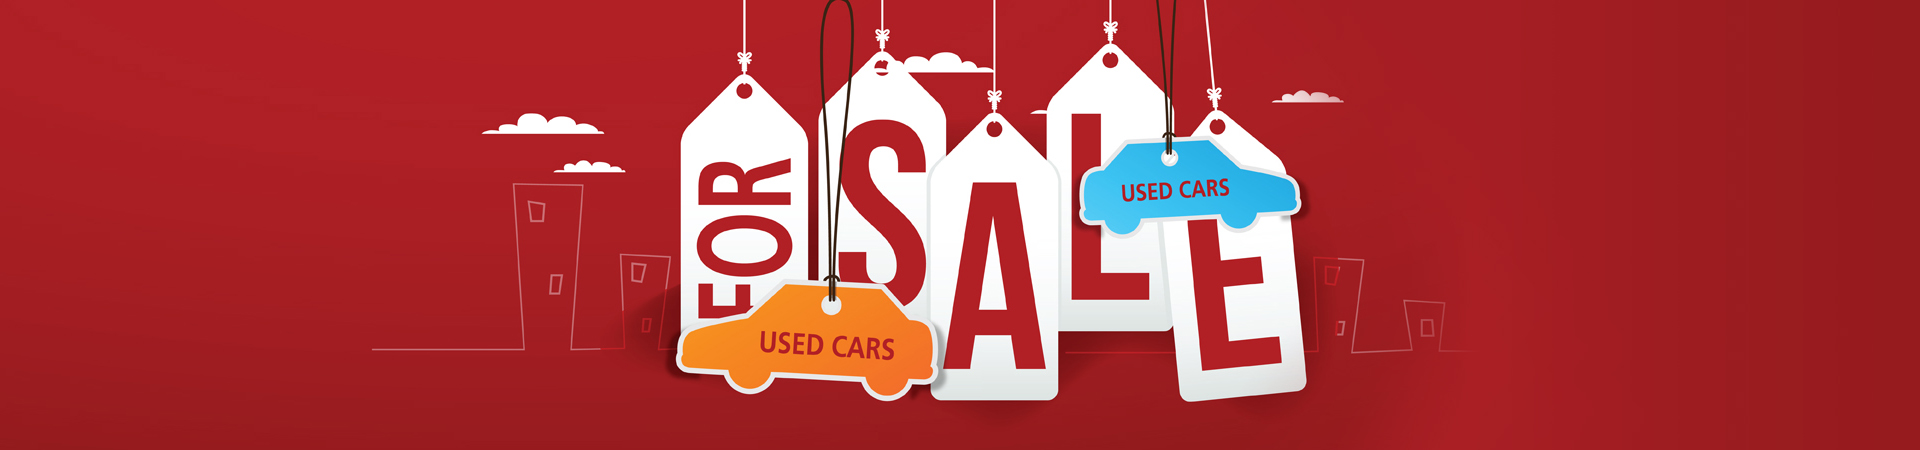 Used-Cars-For-Sale-Banner